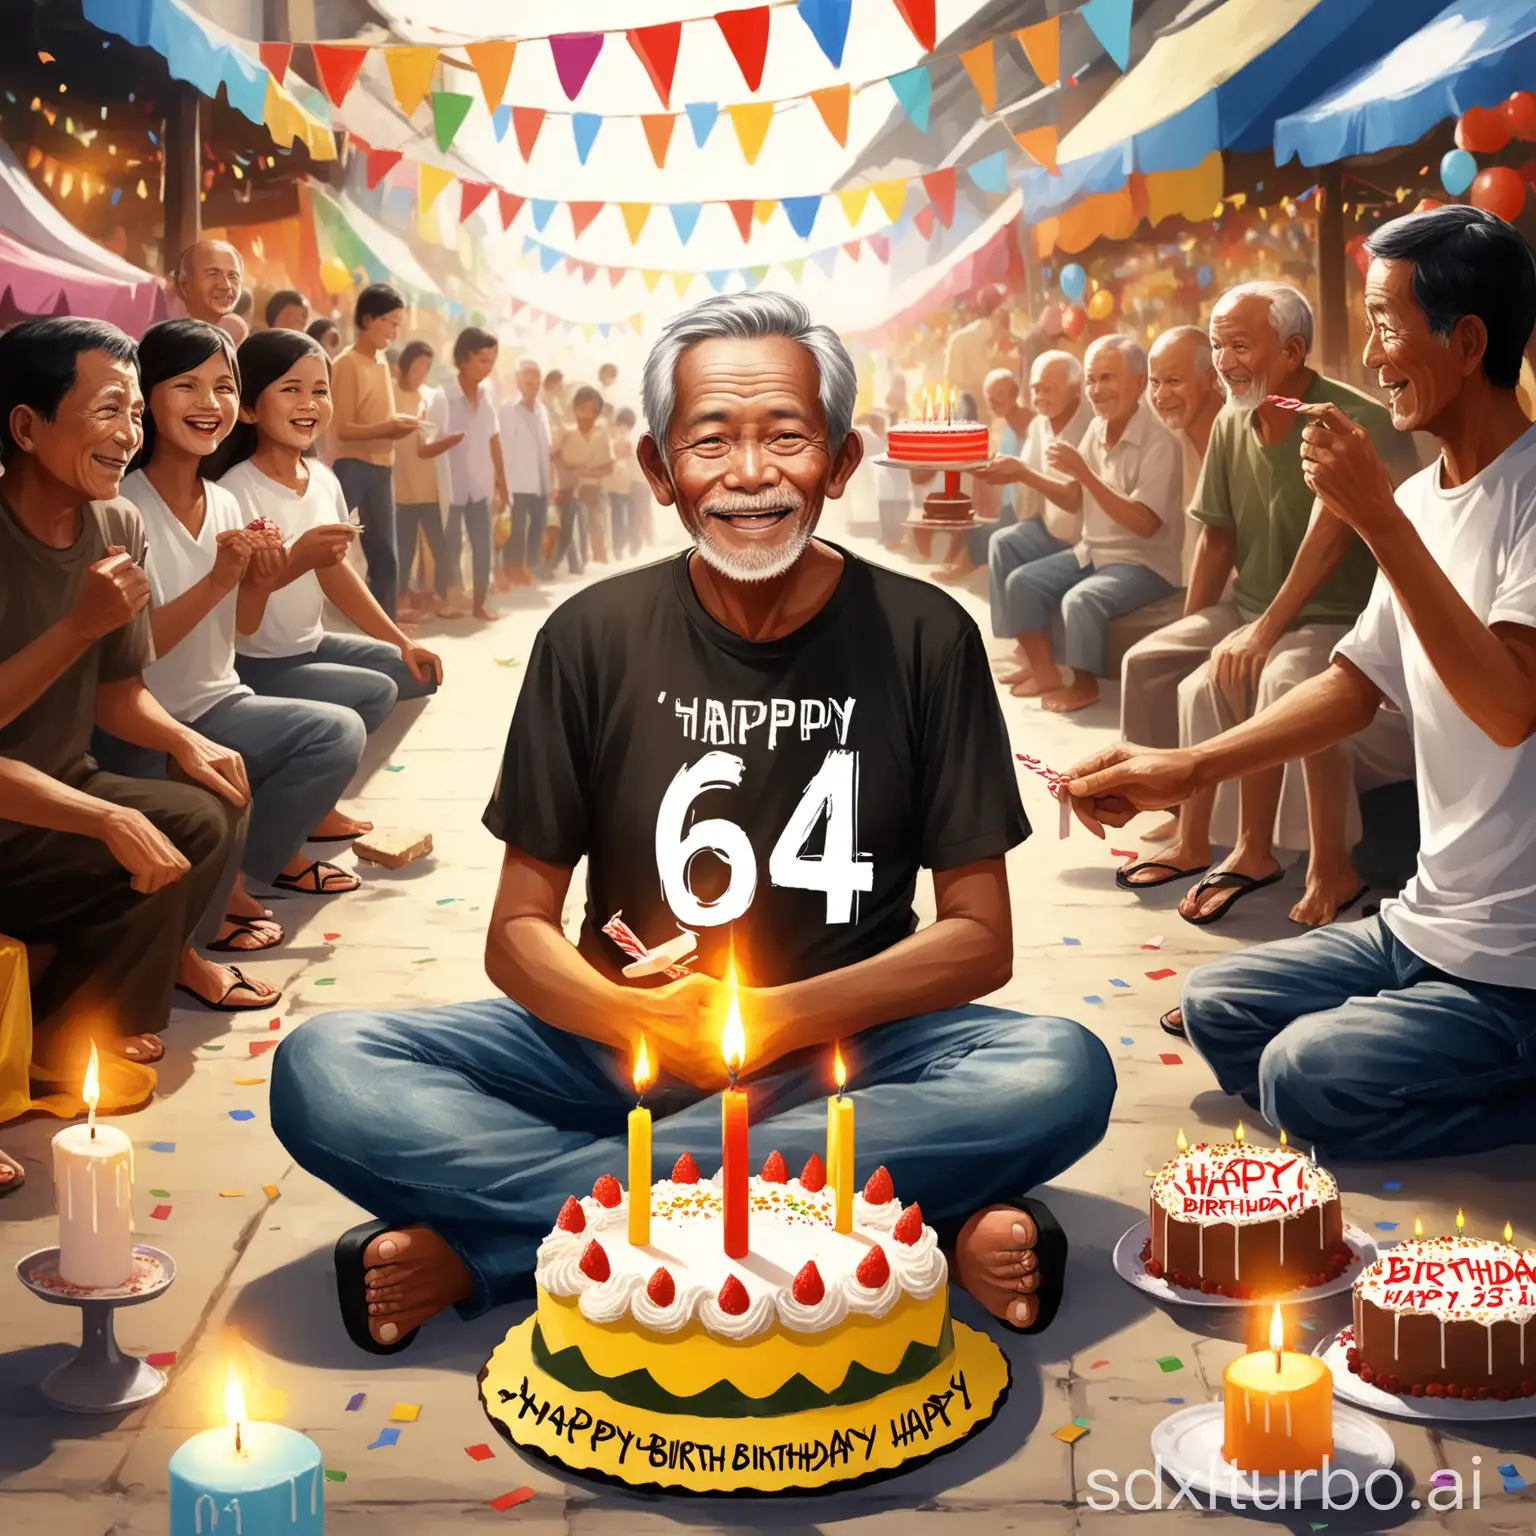 depicts a 64 year old man, Javanese Indonesian face, Black hair,wearing a t-shirt, jeans, flip-flops, sitting cross-legged on the ground while carrying a birthday cake, happily celebrating his birthday, on top of the cake there is a candle burning with the number "64", showing his age. There is writing on the edge of the cake "Happy Birthday", very busy market background, lots of people looking at it, happy and happy atmosphere